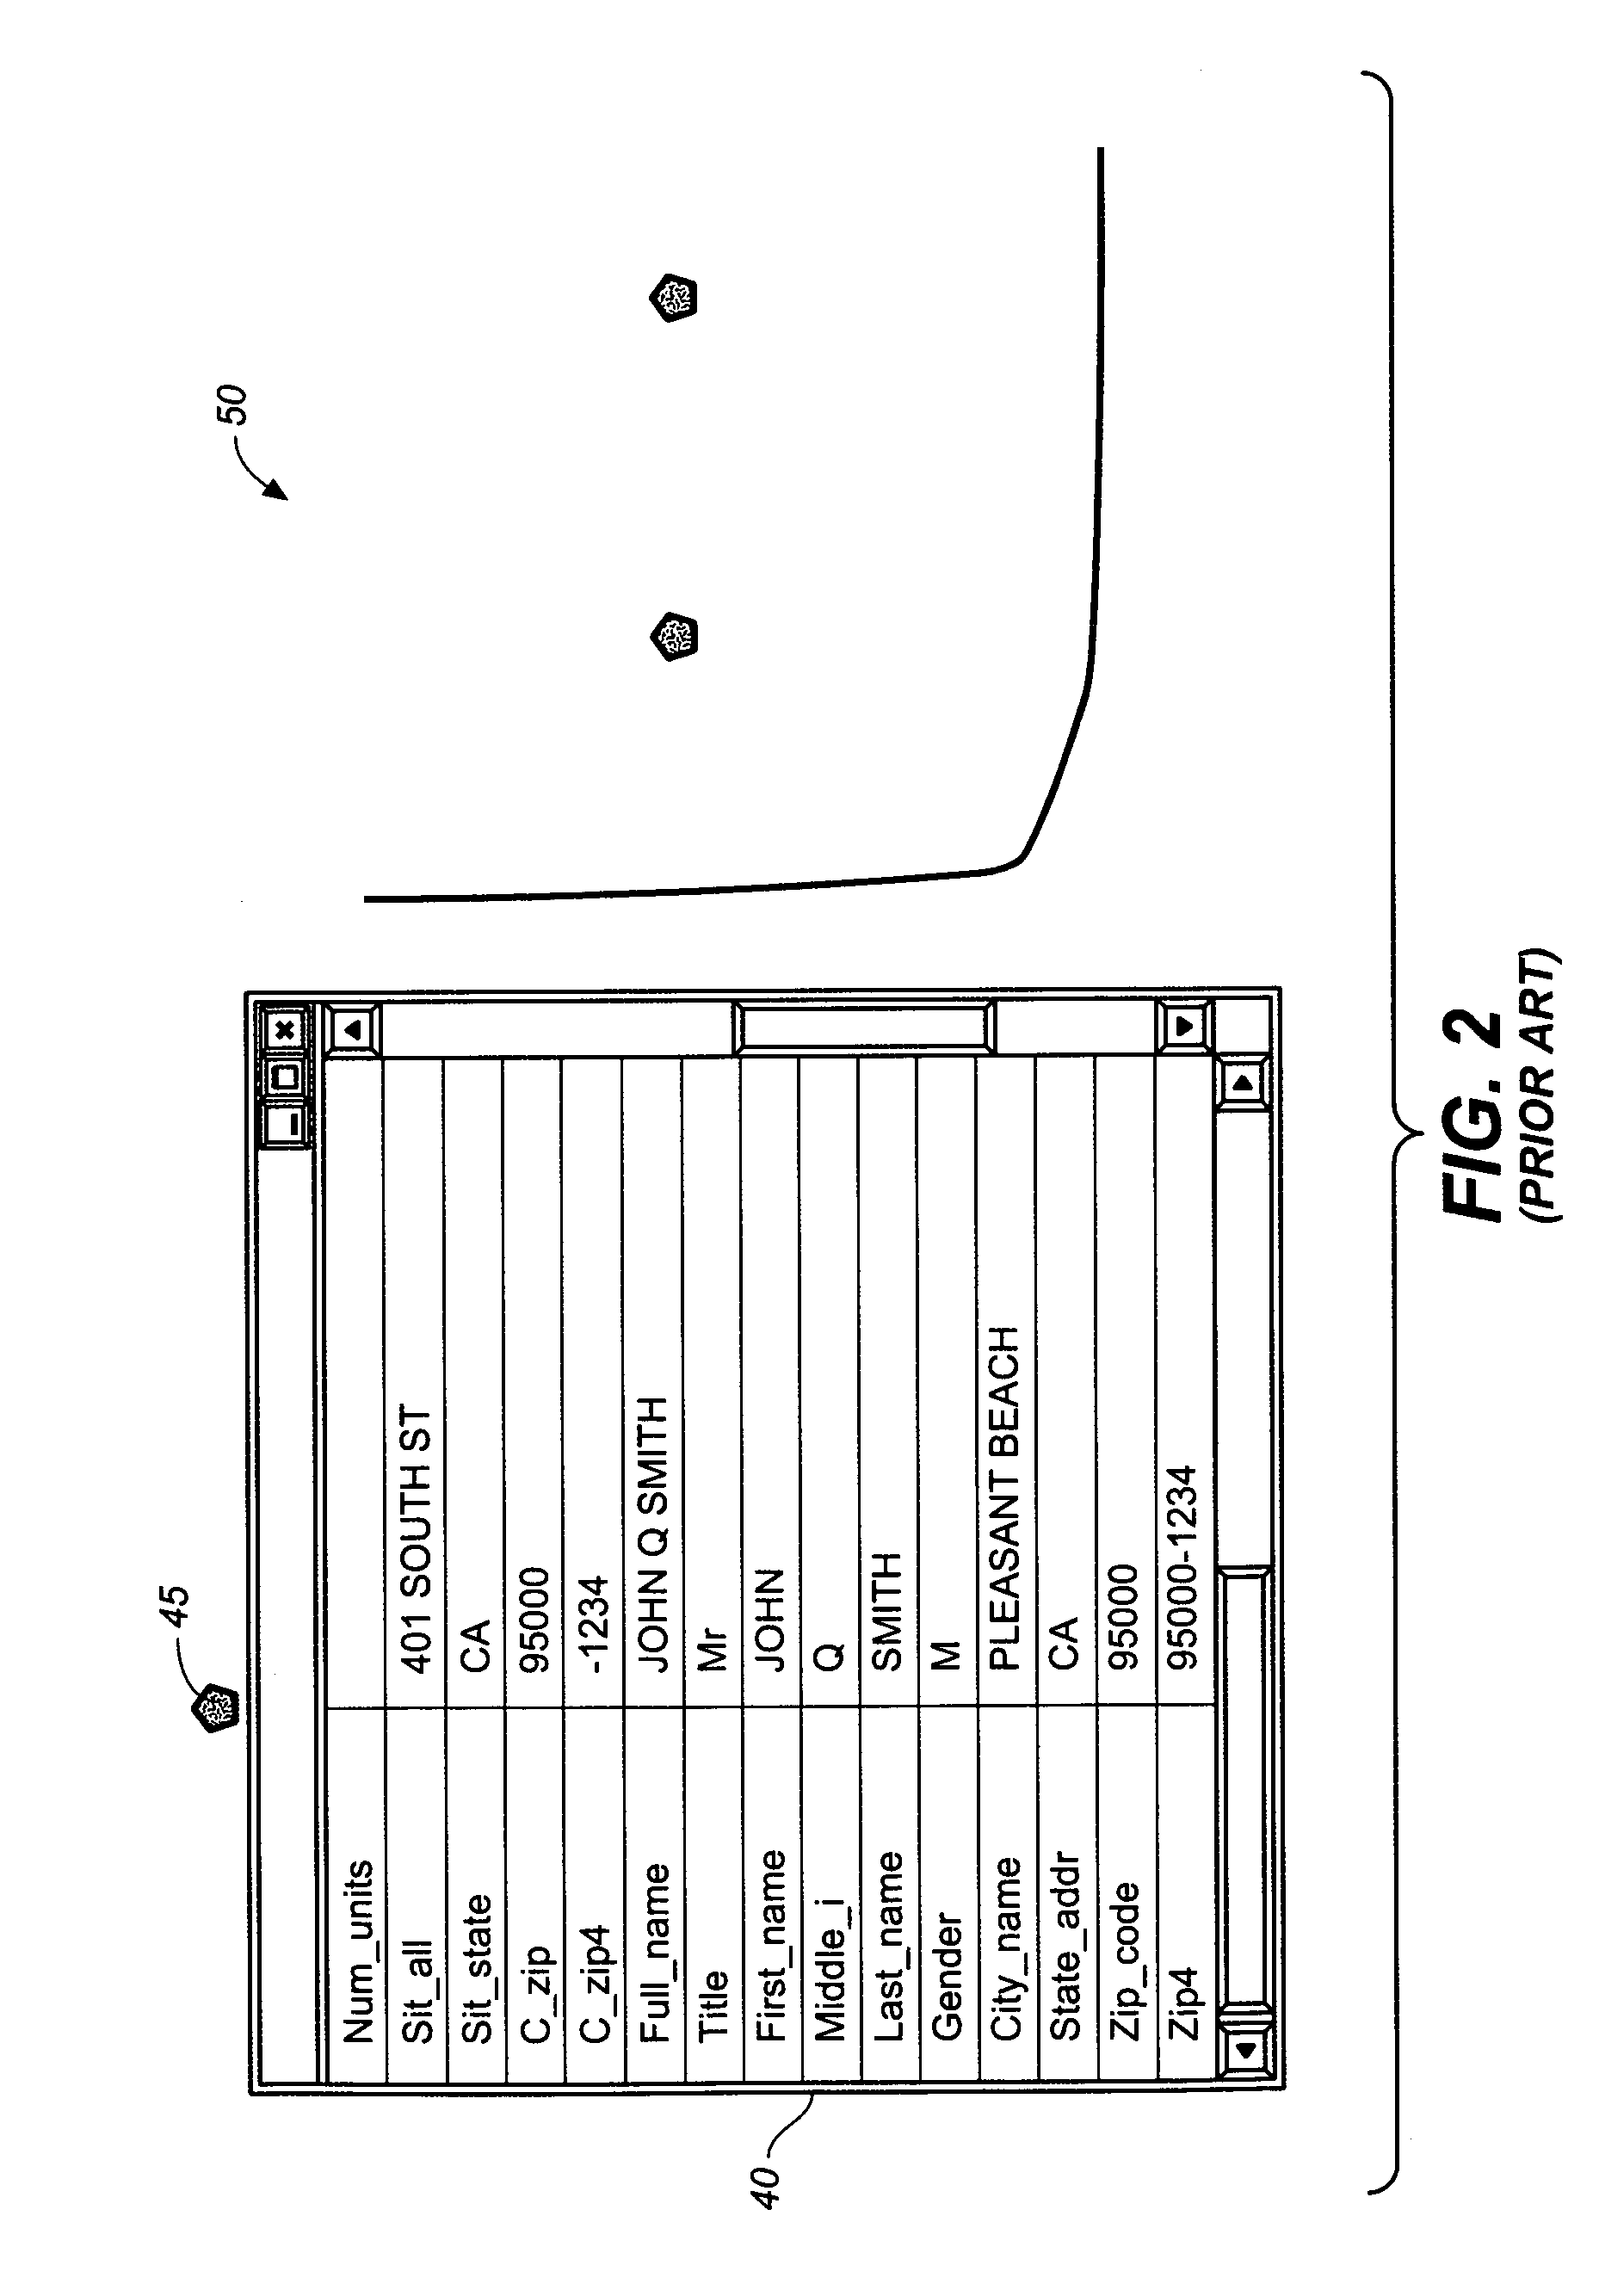 System and method of geospatially mapping topological regions and displaying their attributes